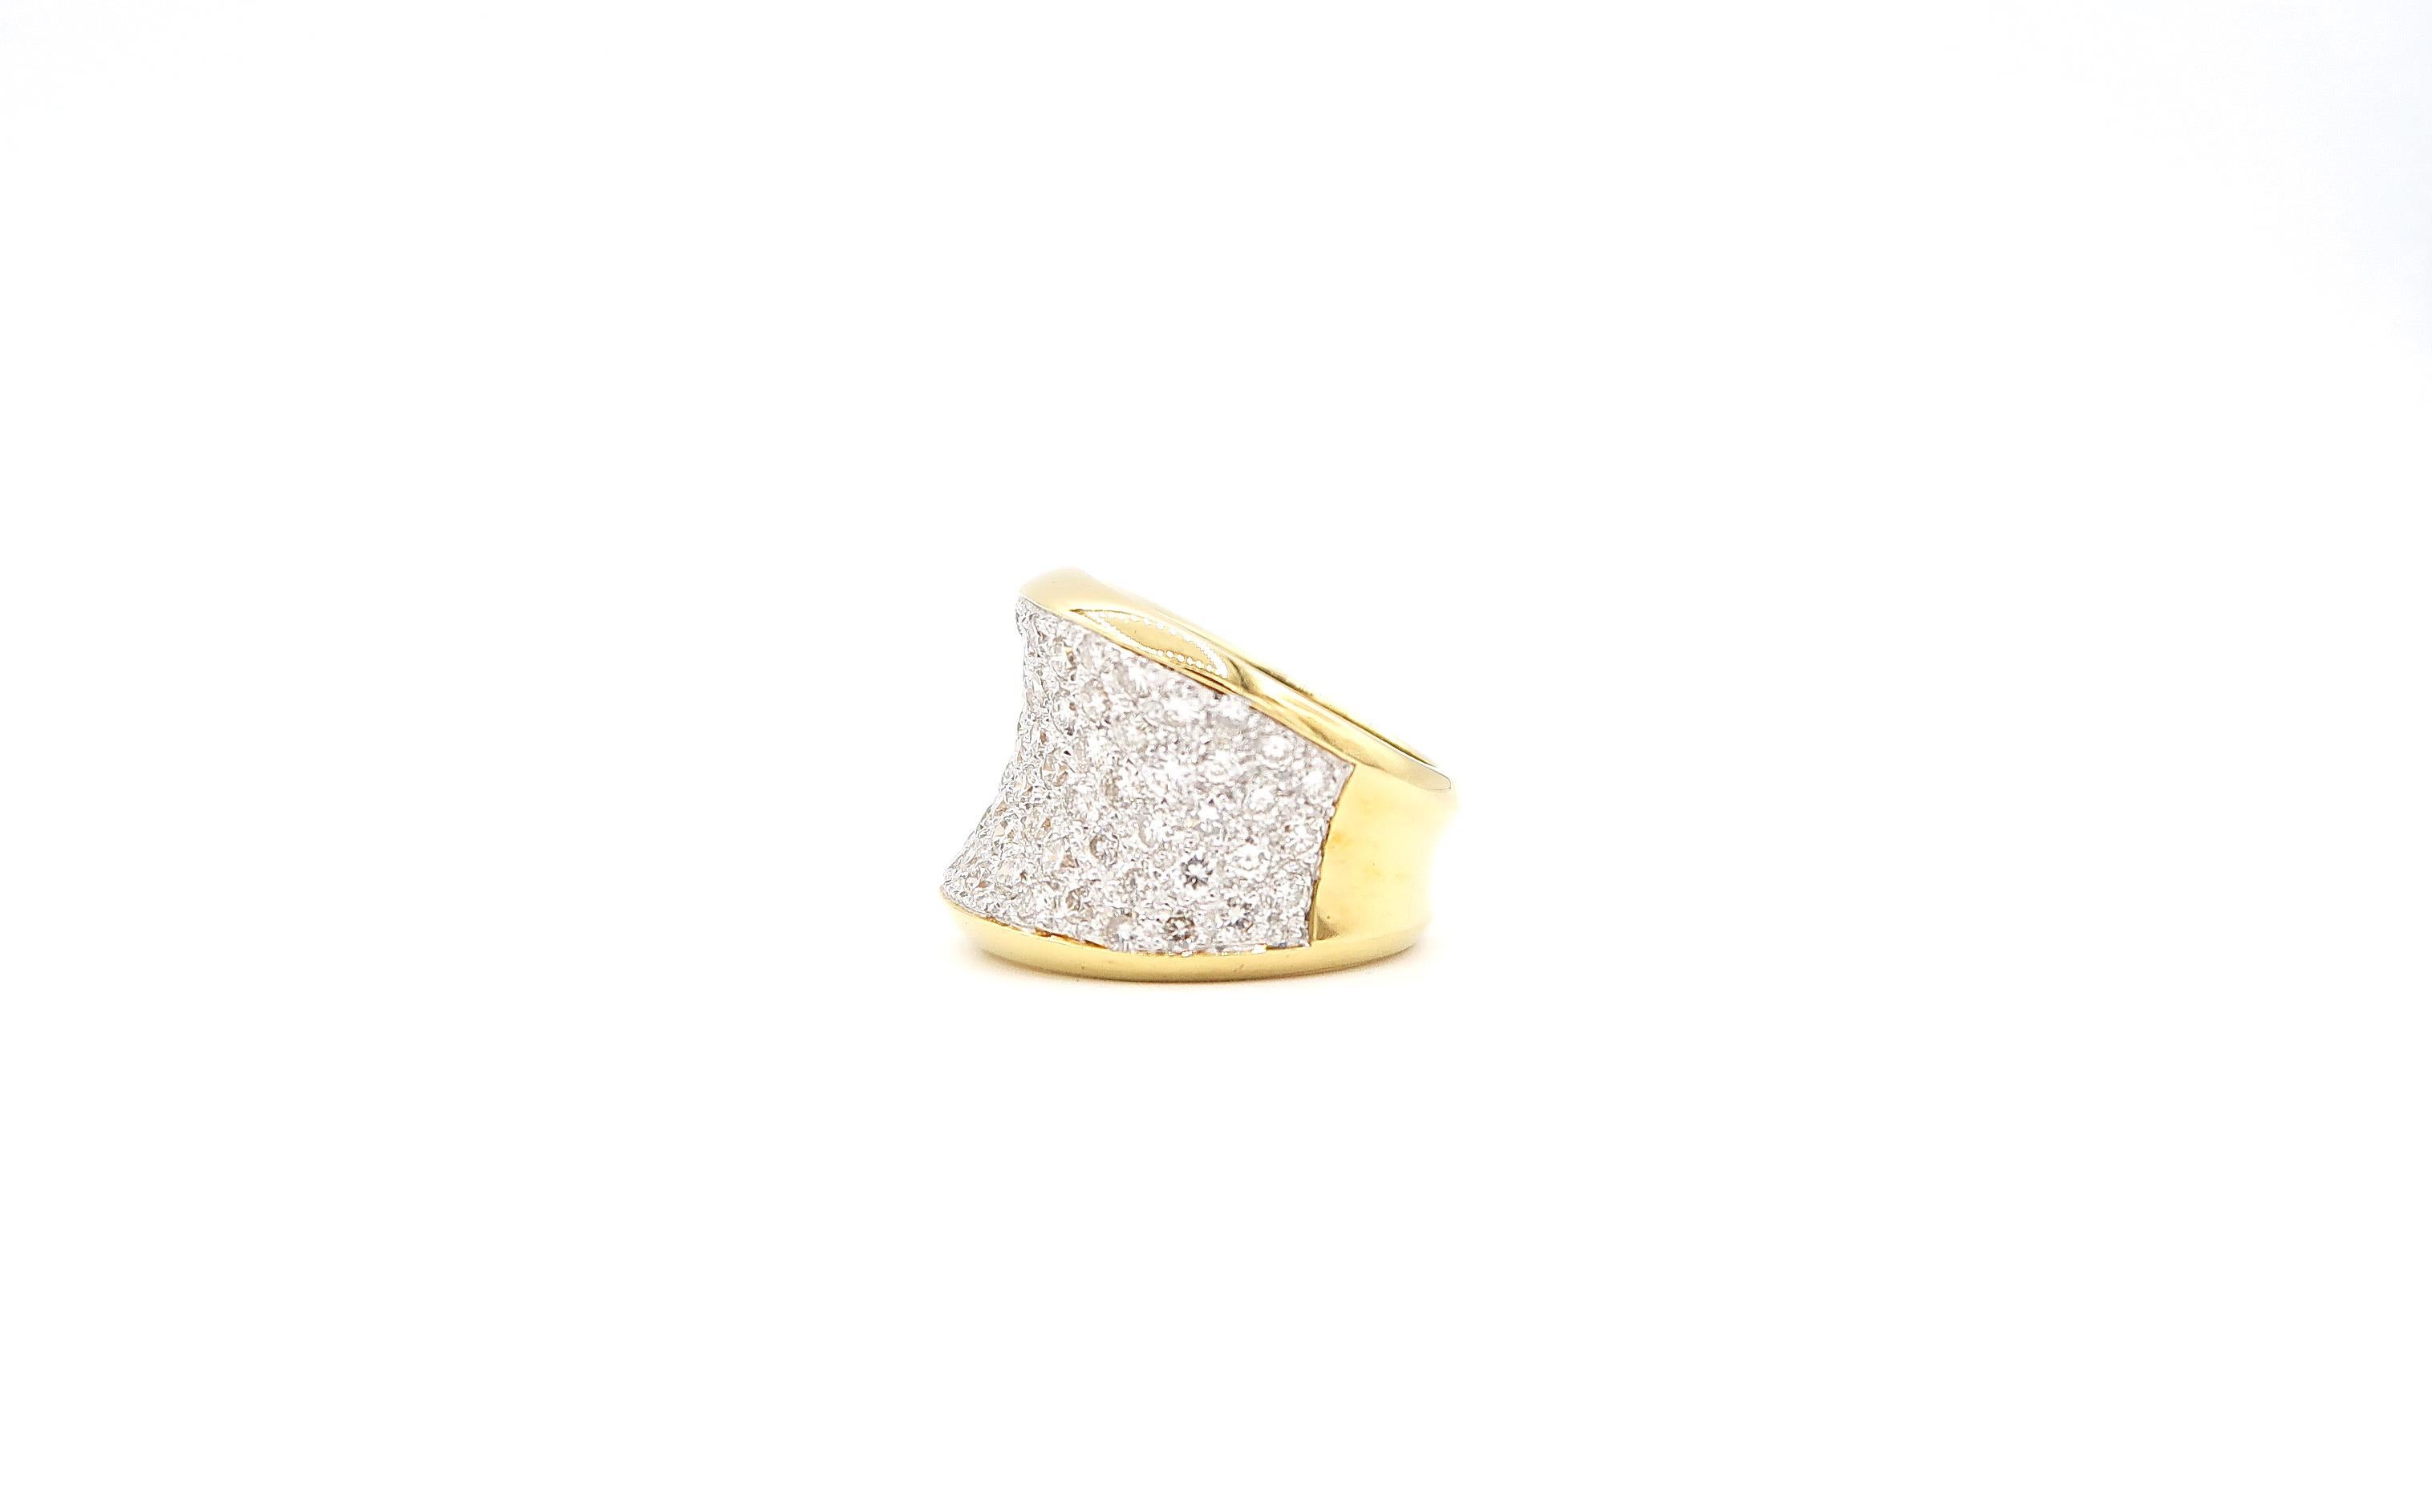 Concave Diamond Pavé 18 Karat Yellow Gold Ring

Please let us know upon checkout if you wish to have the ring resized.

Ring size: US 6, UK L

Gold: 18K 14.60g.
Diamond: 2.69cts.